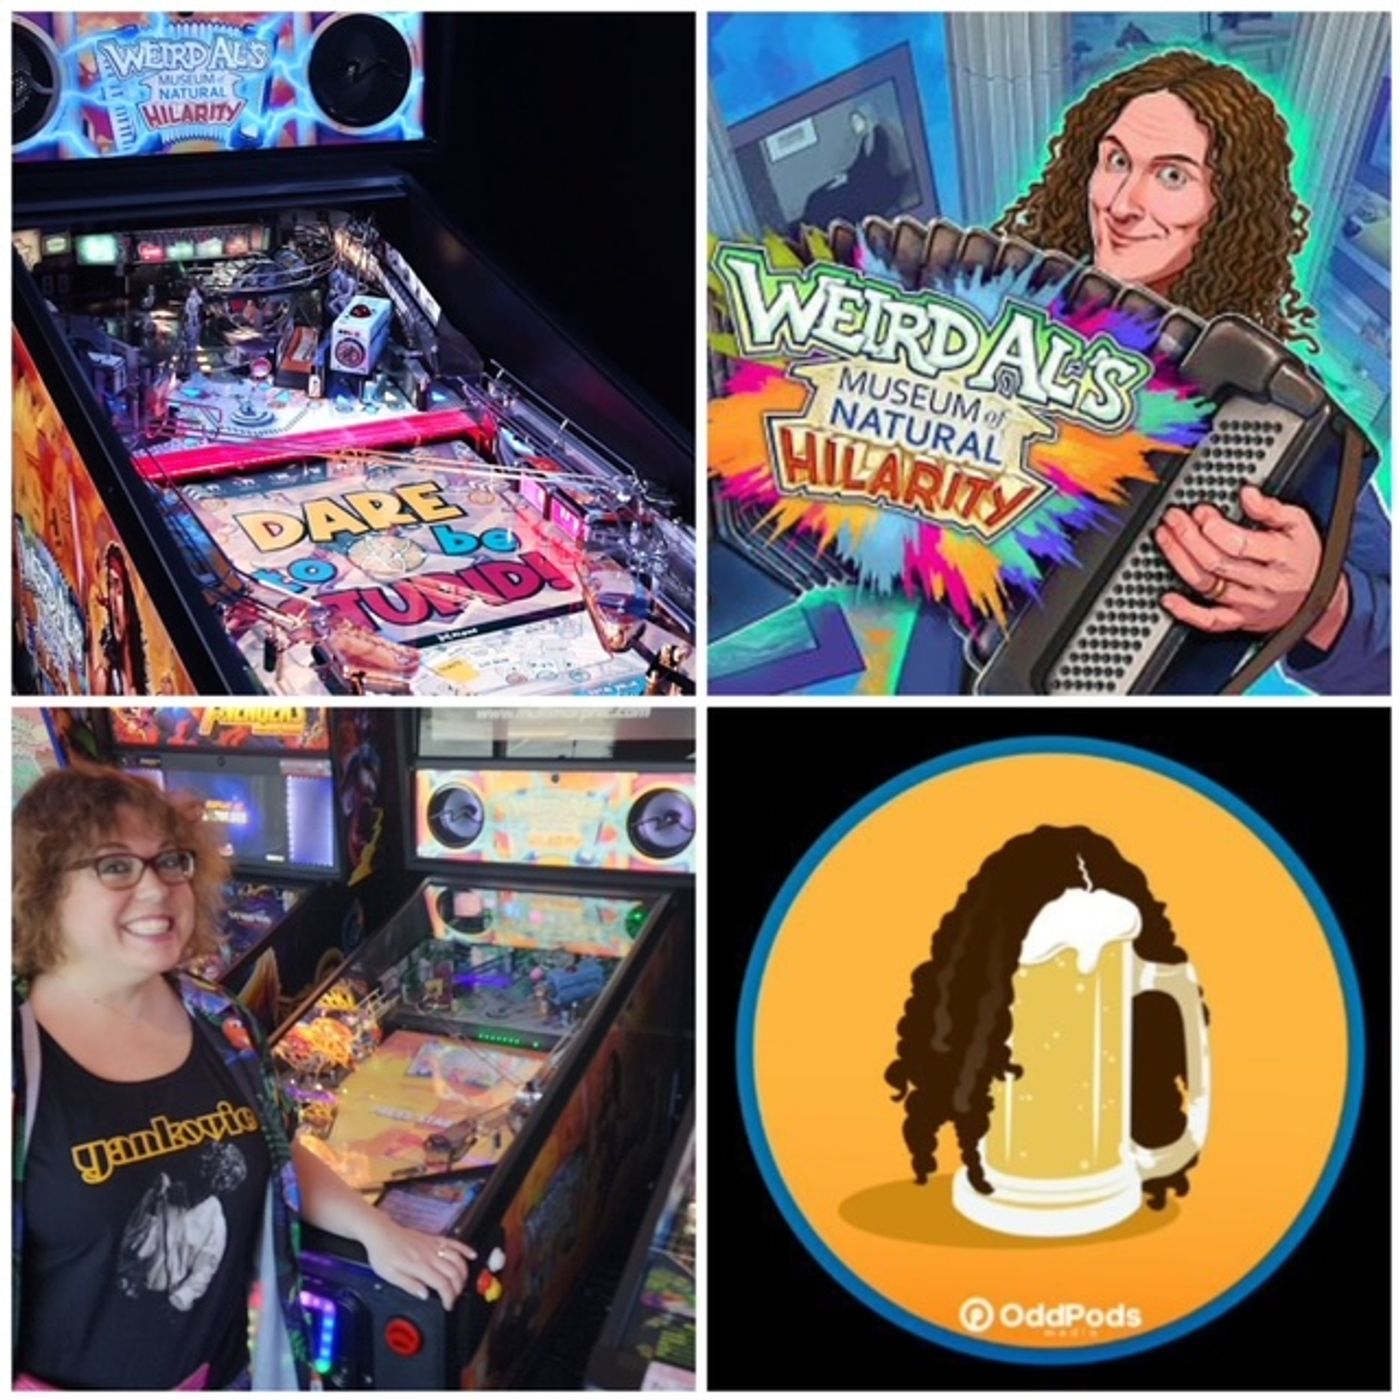 Talking Weird Al’s Museum of Natural Hilarity with Co-Creative Directors Stephen & Michael